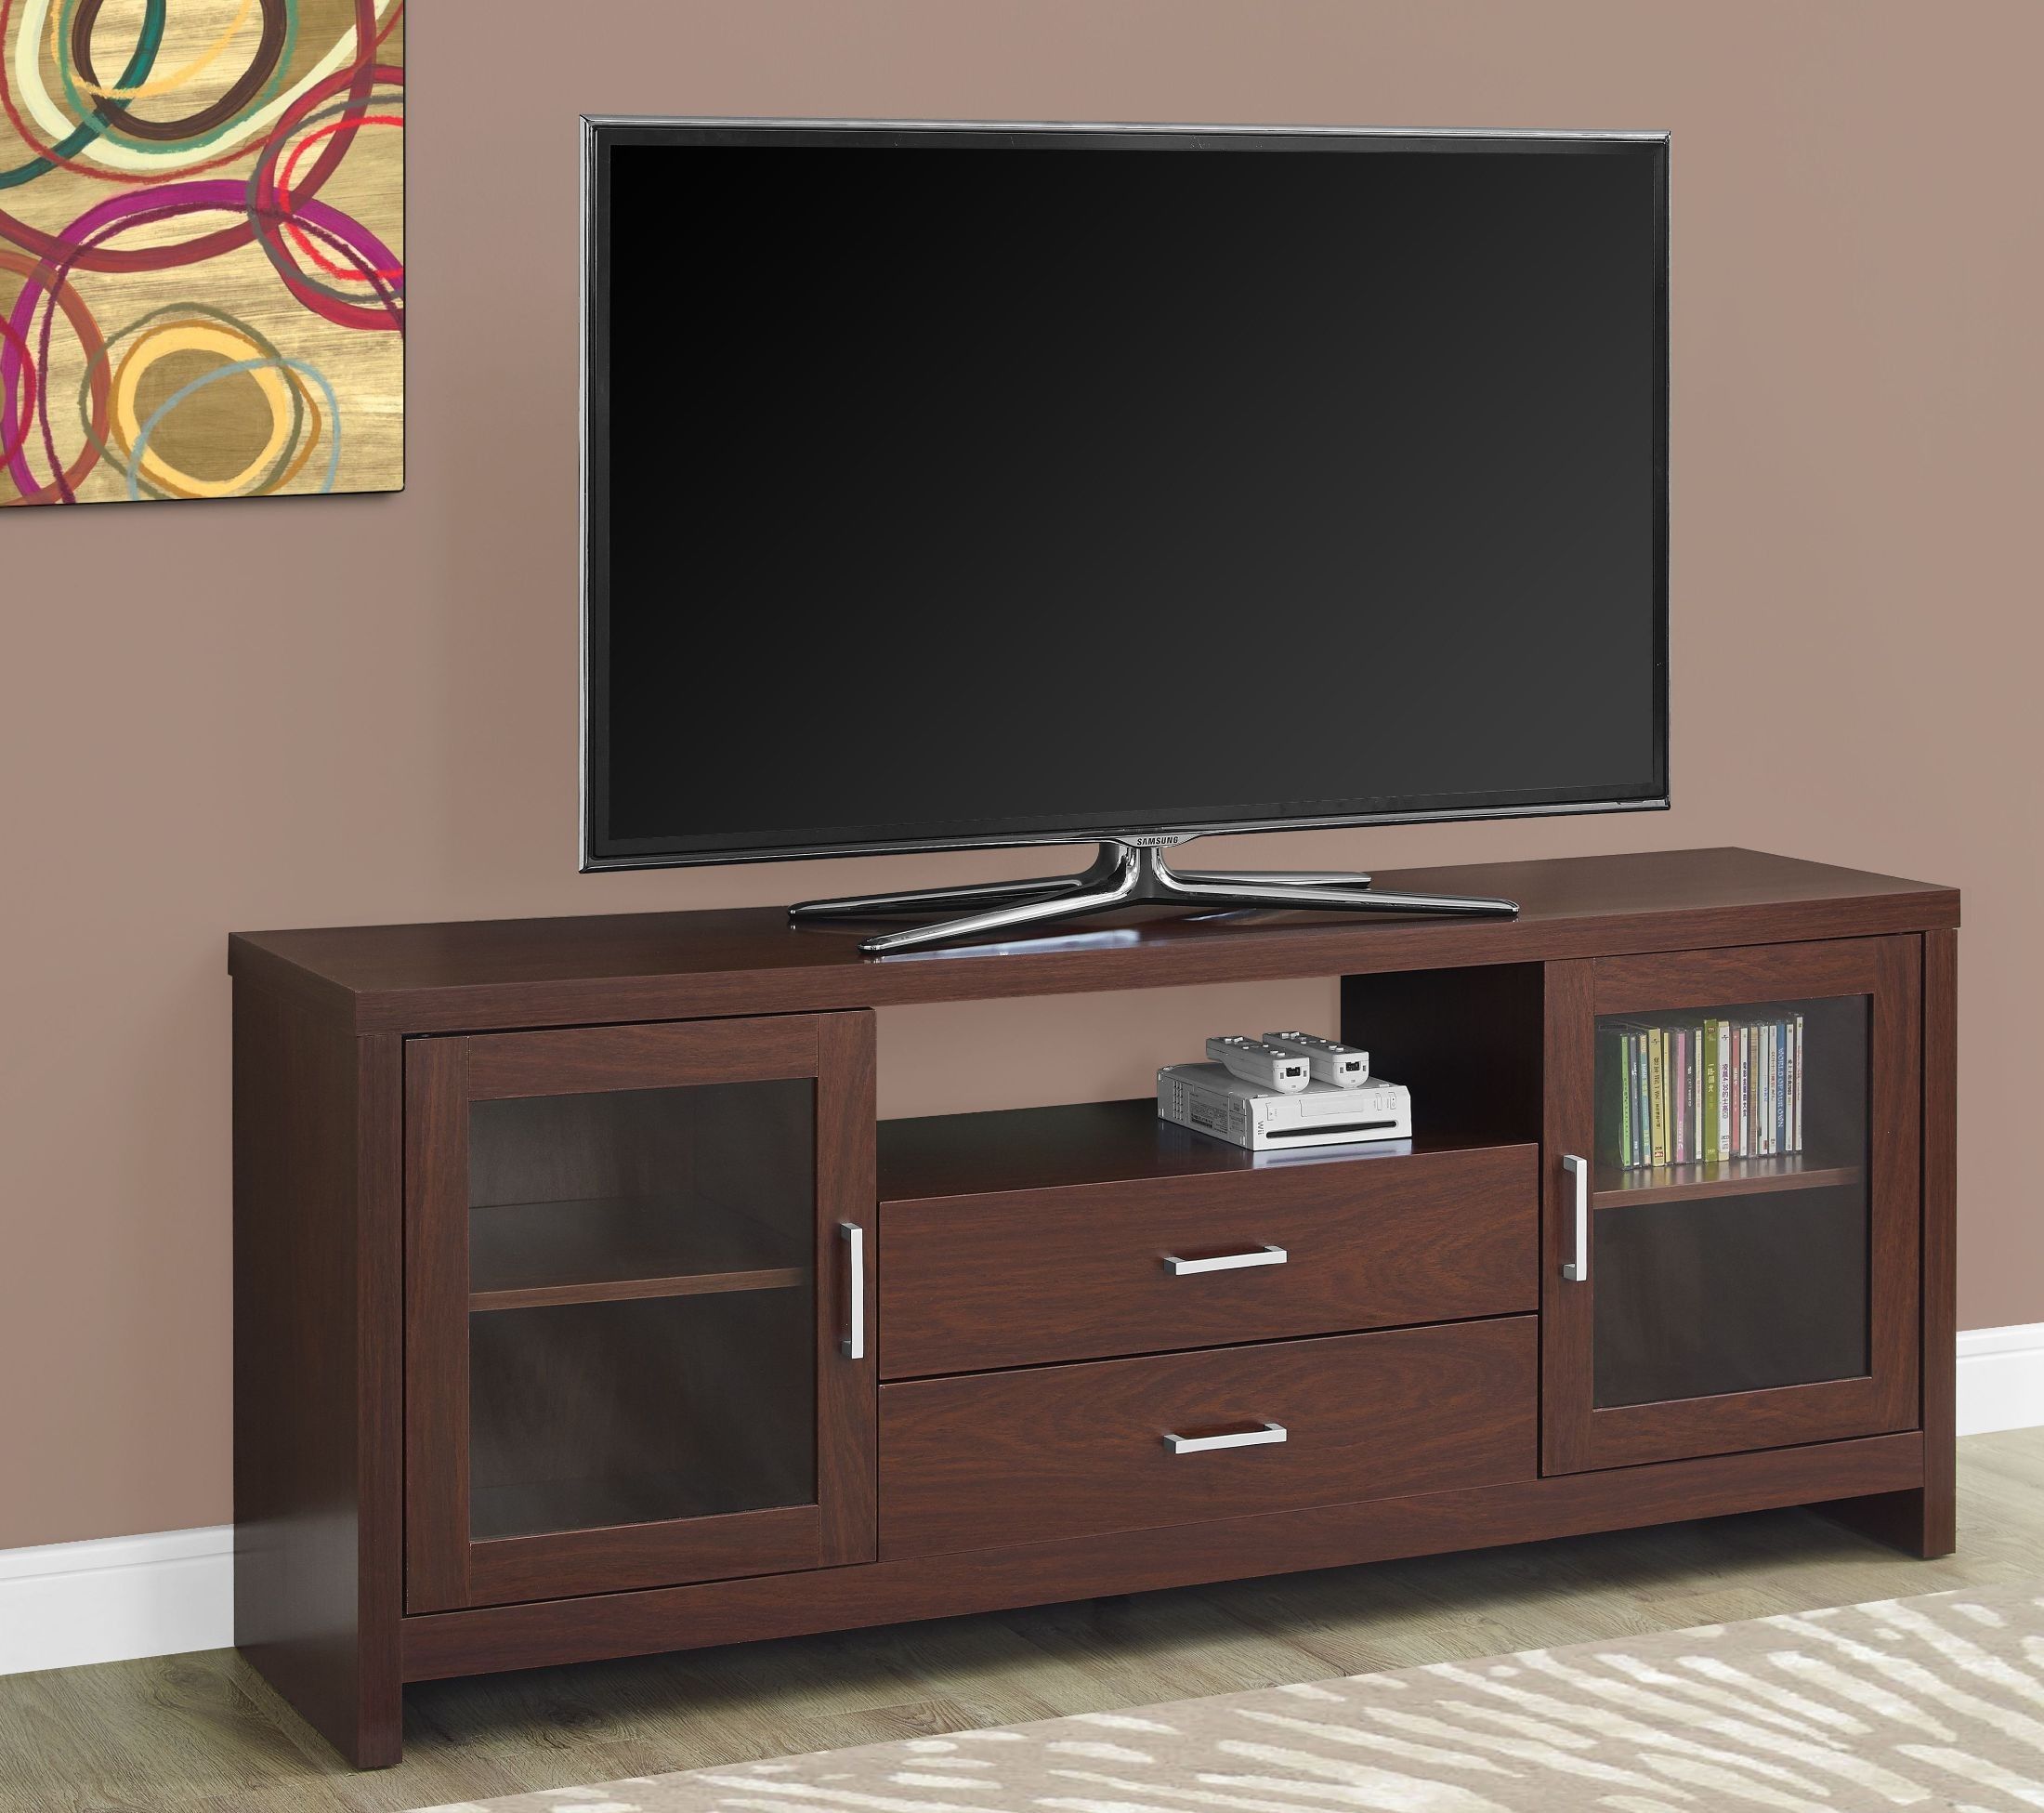 60" Warm Cherry Drawer Tv Stand From Monarch | Coleman Inside Cherry Wood Tv Cabinets (View 2 of 15)